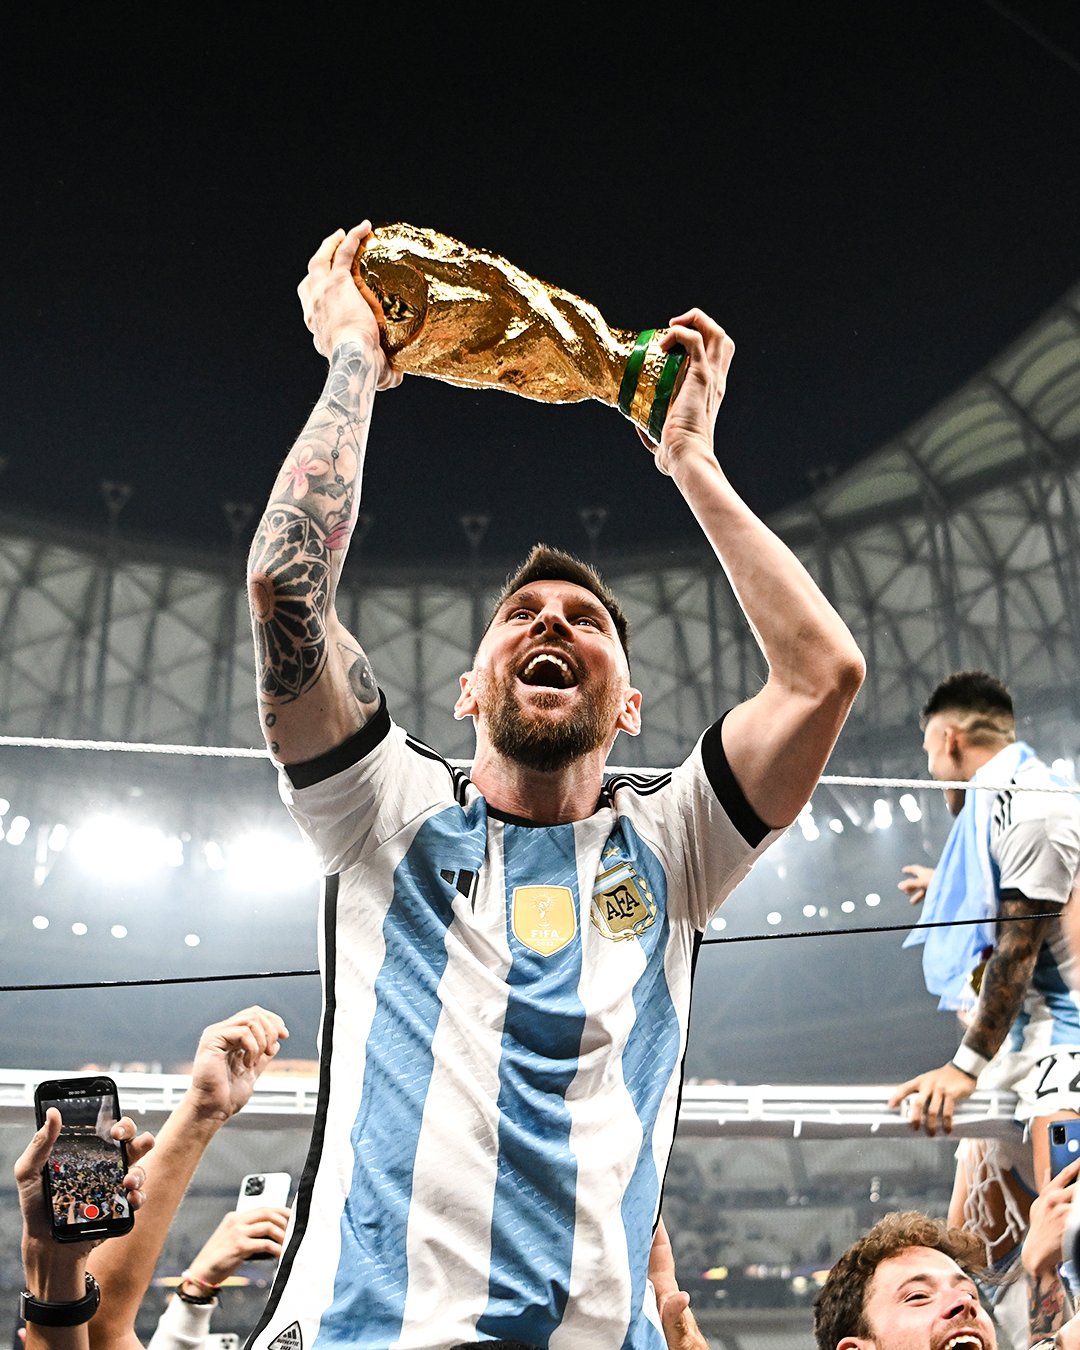 B R Football Over 42M Likes, Lionel Messi's World Cup Victory Post Is Now The Most Liked Instagram Post By A Sportsperson In History